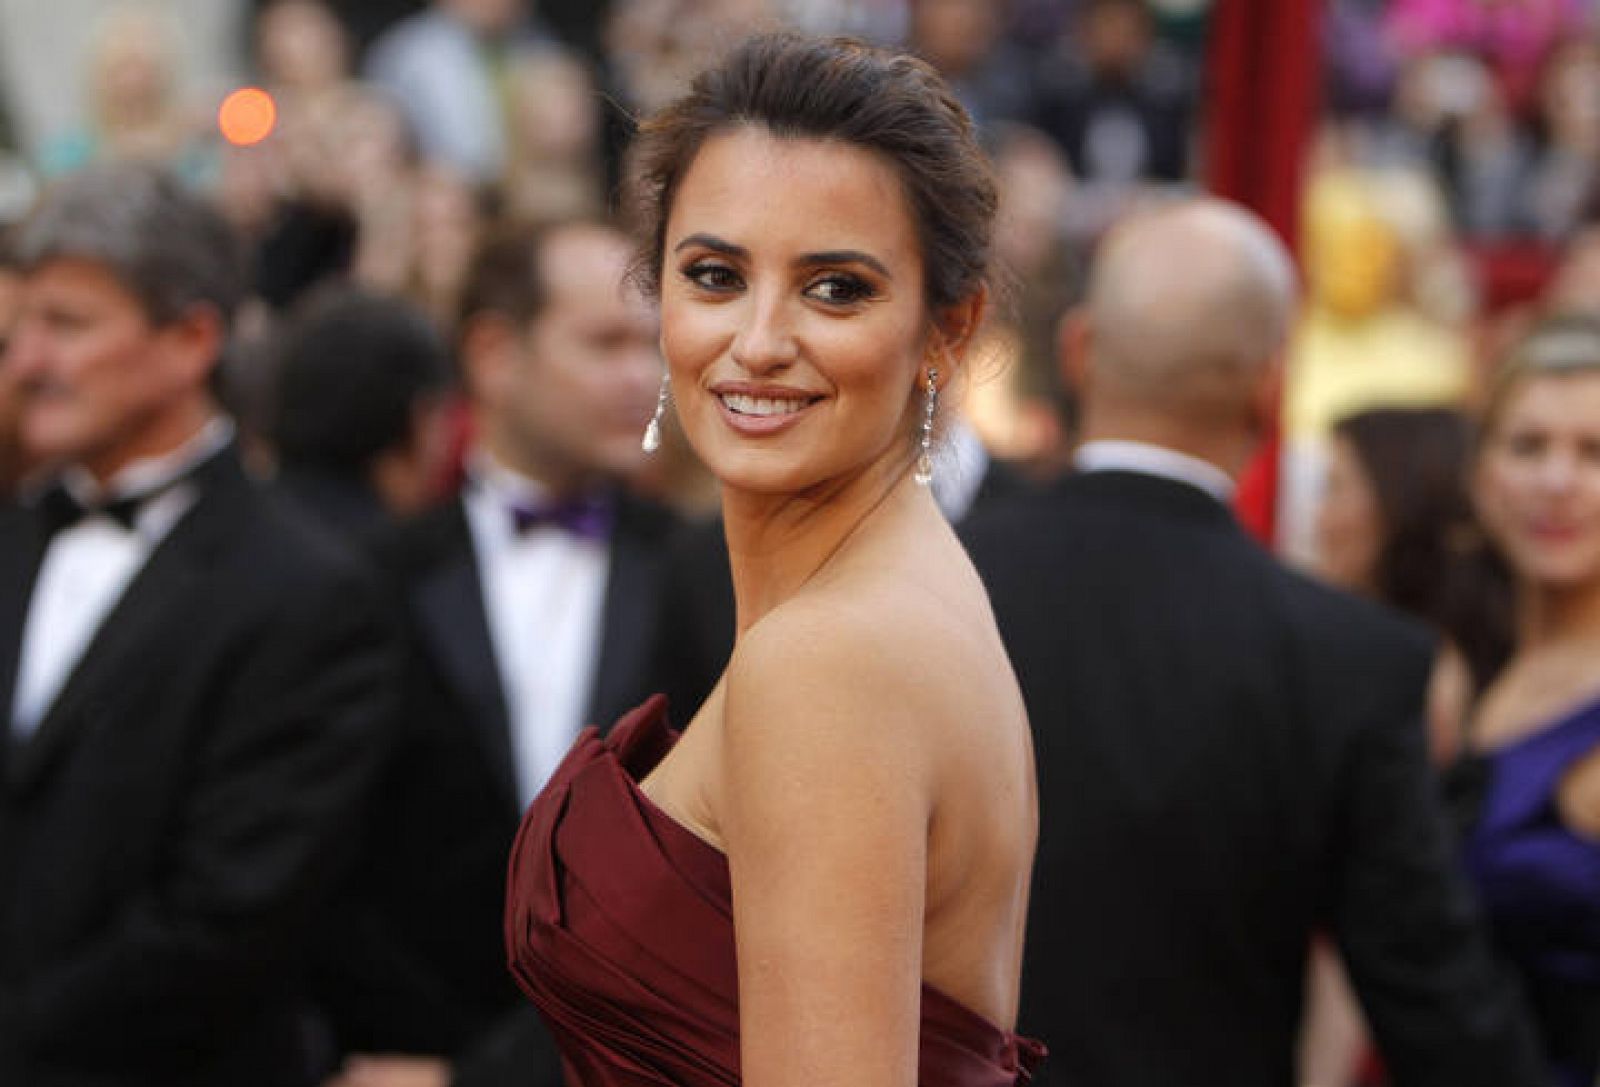 Penelope Cruz, best supporting actress nominee for "Nine," arrives at the 82nd Academy Awards in Hollywood